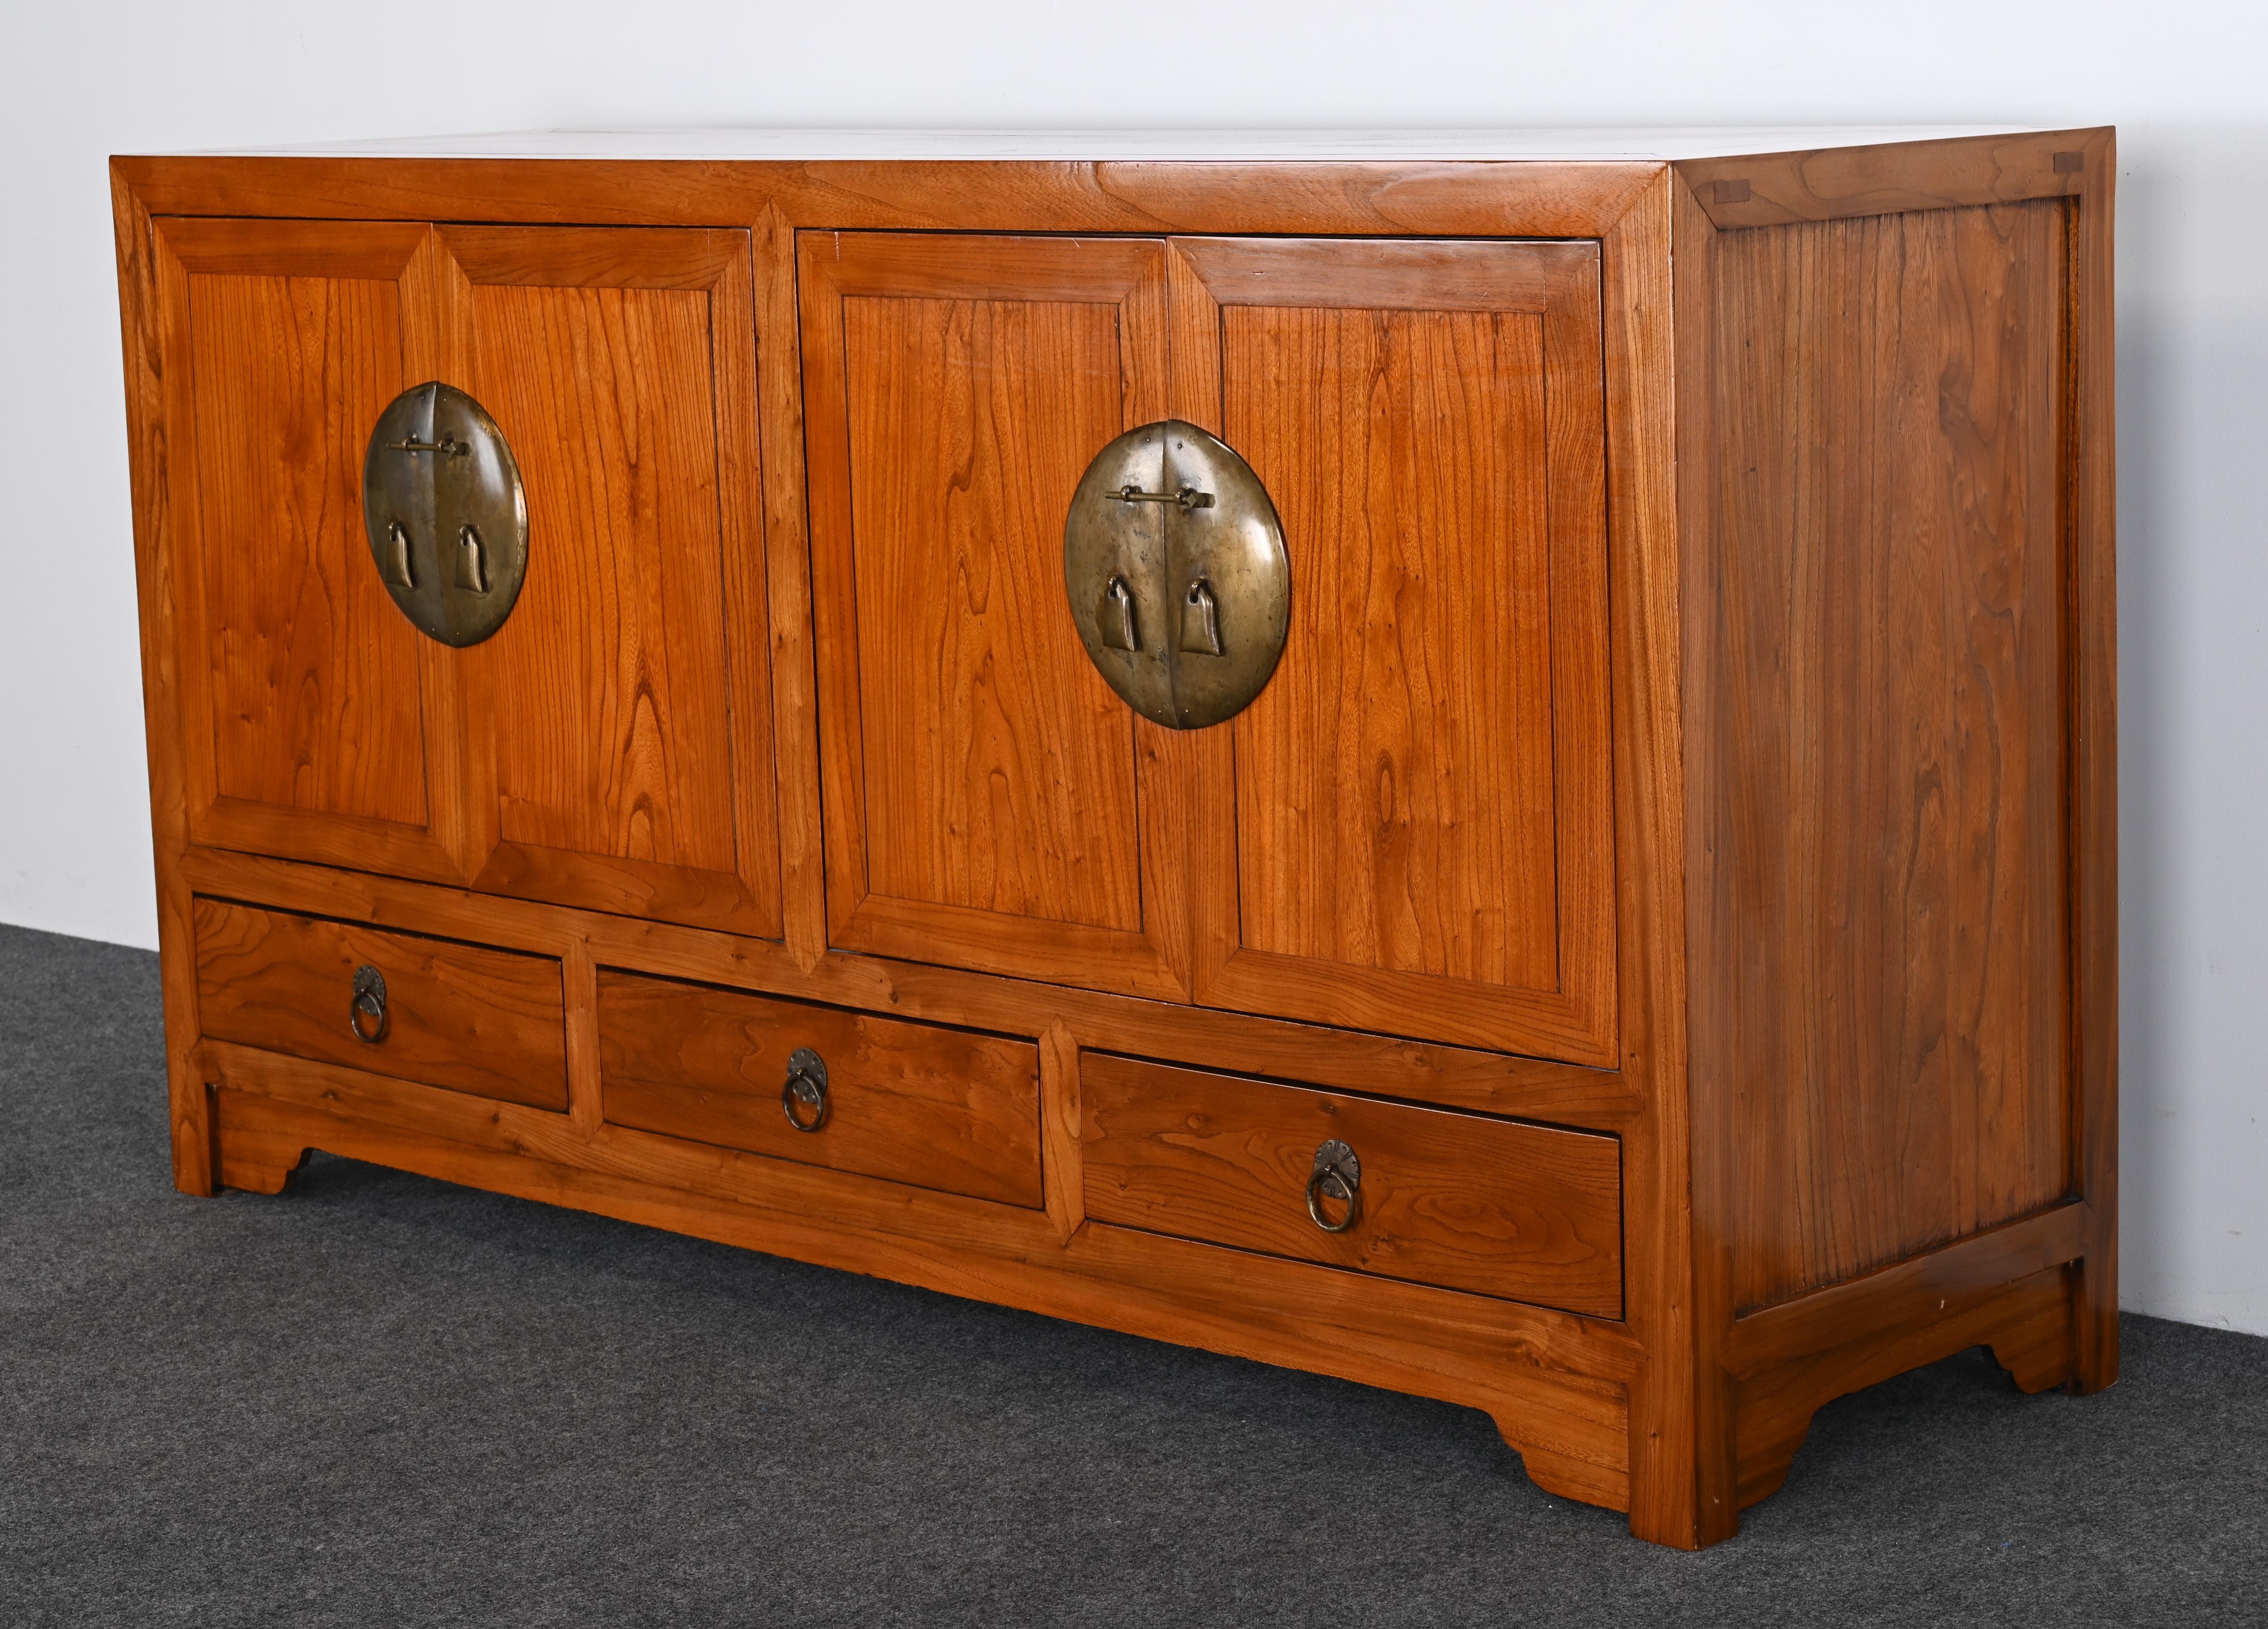 A handsome Chinese credenza or cabinet made of elmwood with brass hardware. This Asian sideboard has beautiful amber tones with mortise and tenon joints. The cabinet is functional with ample storage with open shelving and additional drawers. This